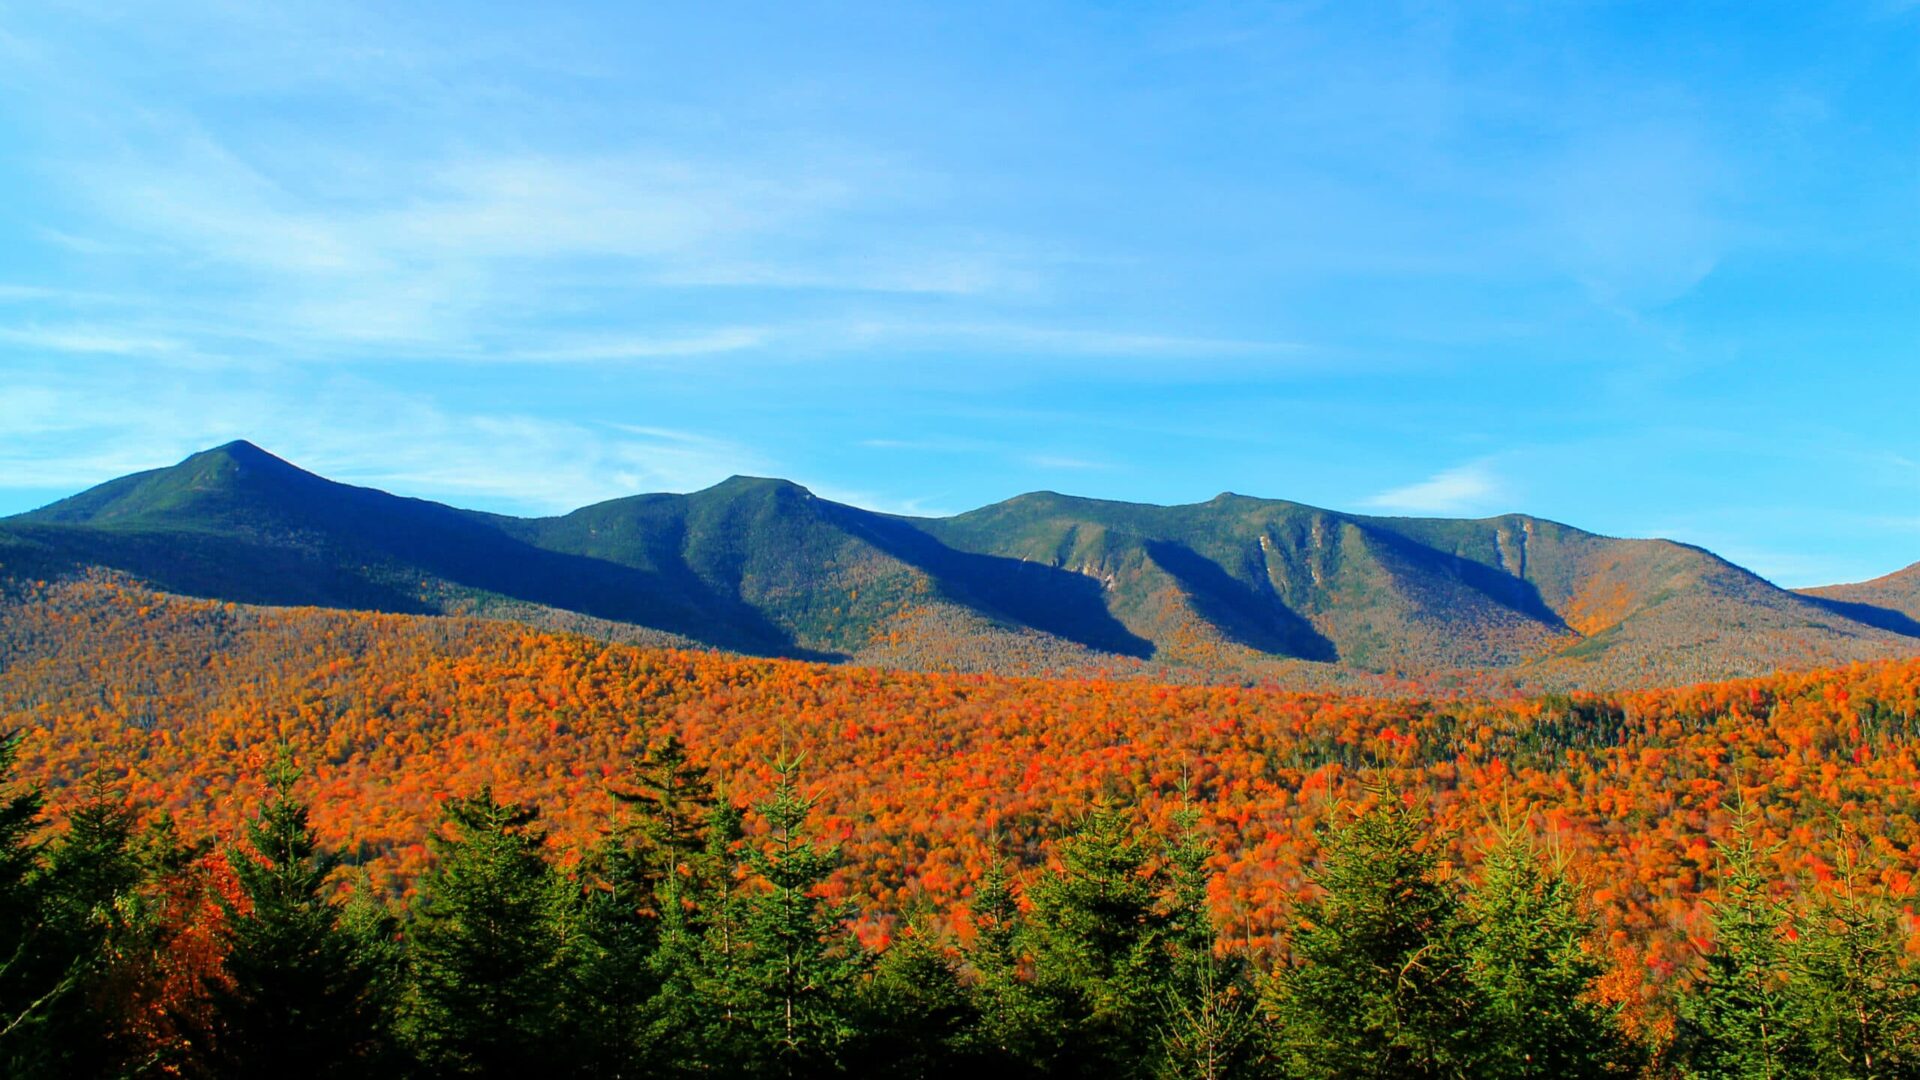 view on the mountains at Kancamagus Highway in the fall|Kancamagus Highway White Mountains New Hampshire|Mount Washington Auto Road 2014 WCG Photography